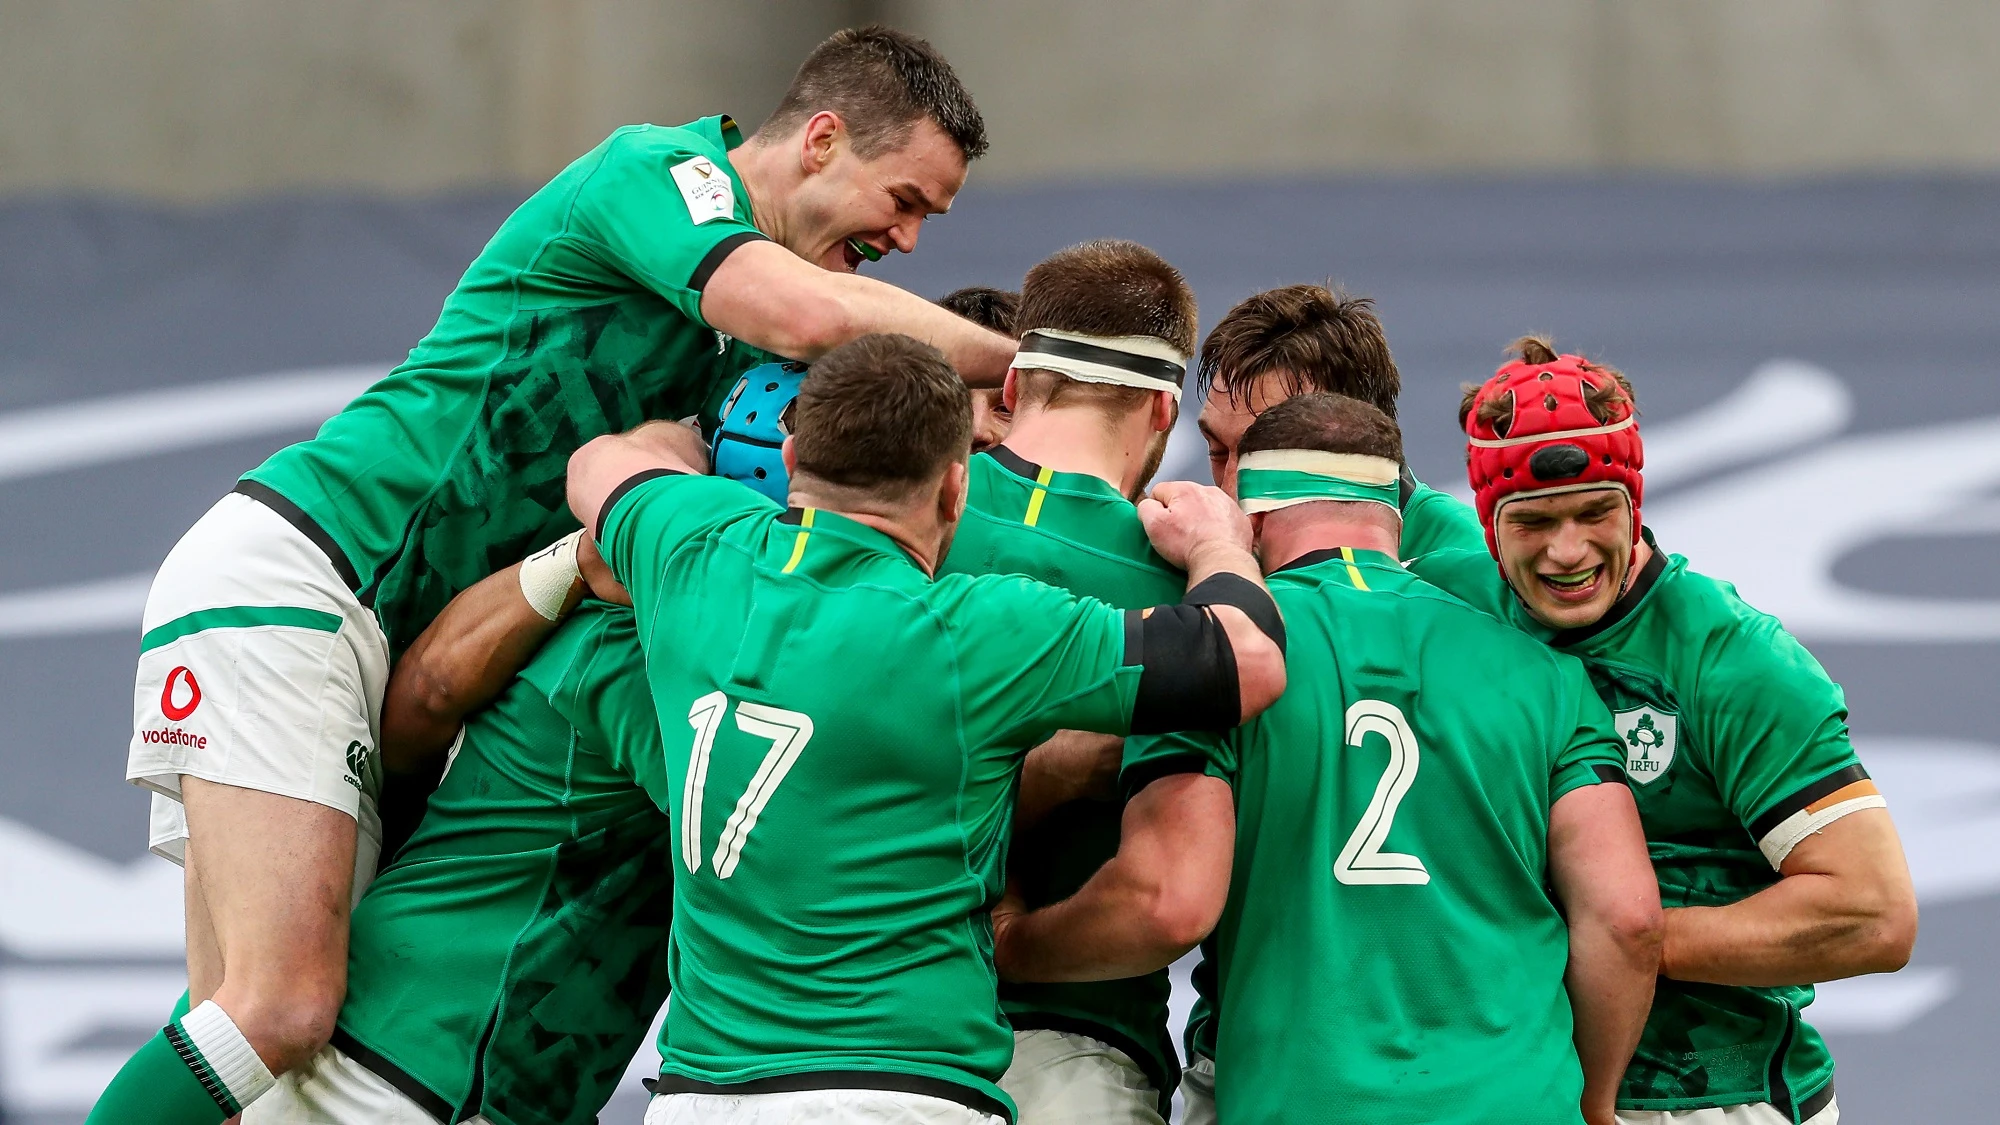 Ireland players celebrate with Keith Earls after scoring the opening try 20/3/2021